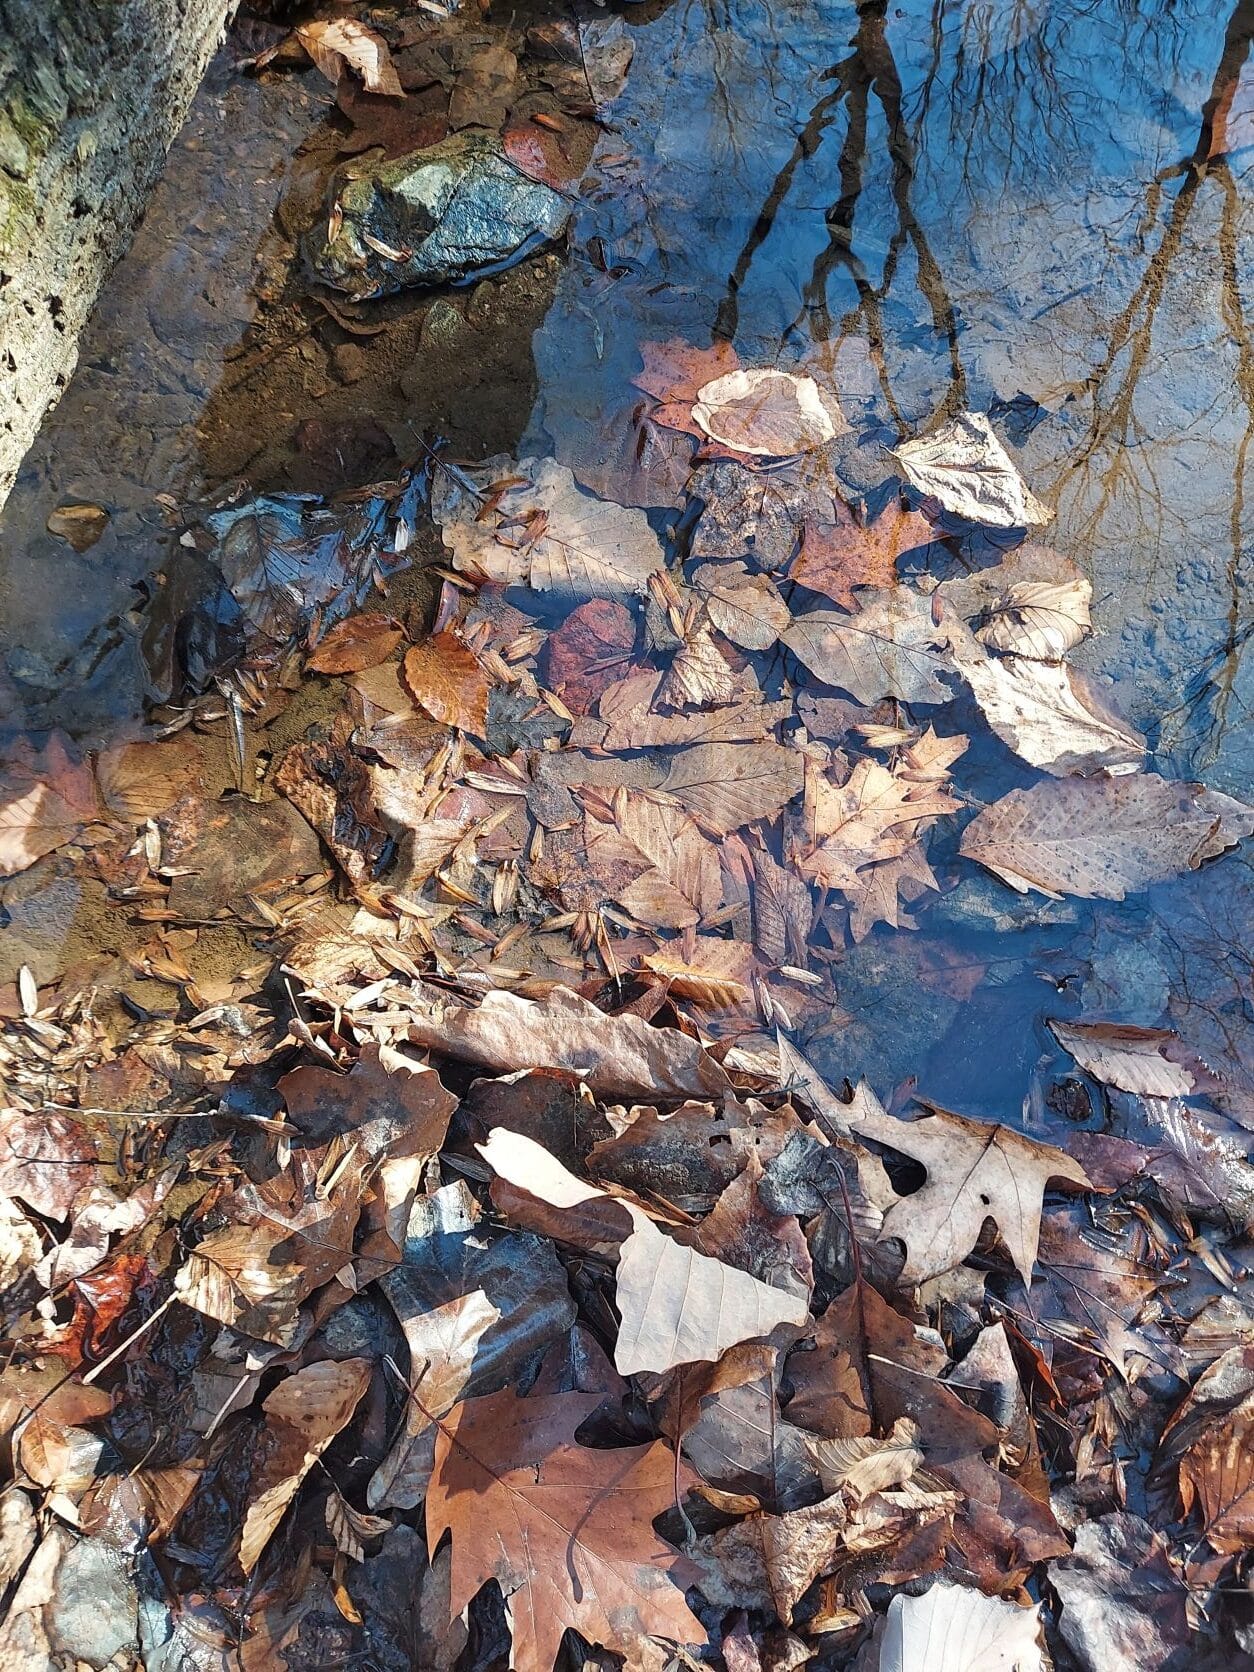 A variety of brown leaves laying on the streambed.